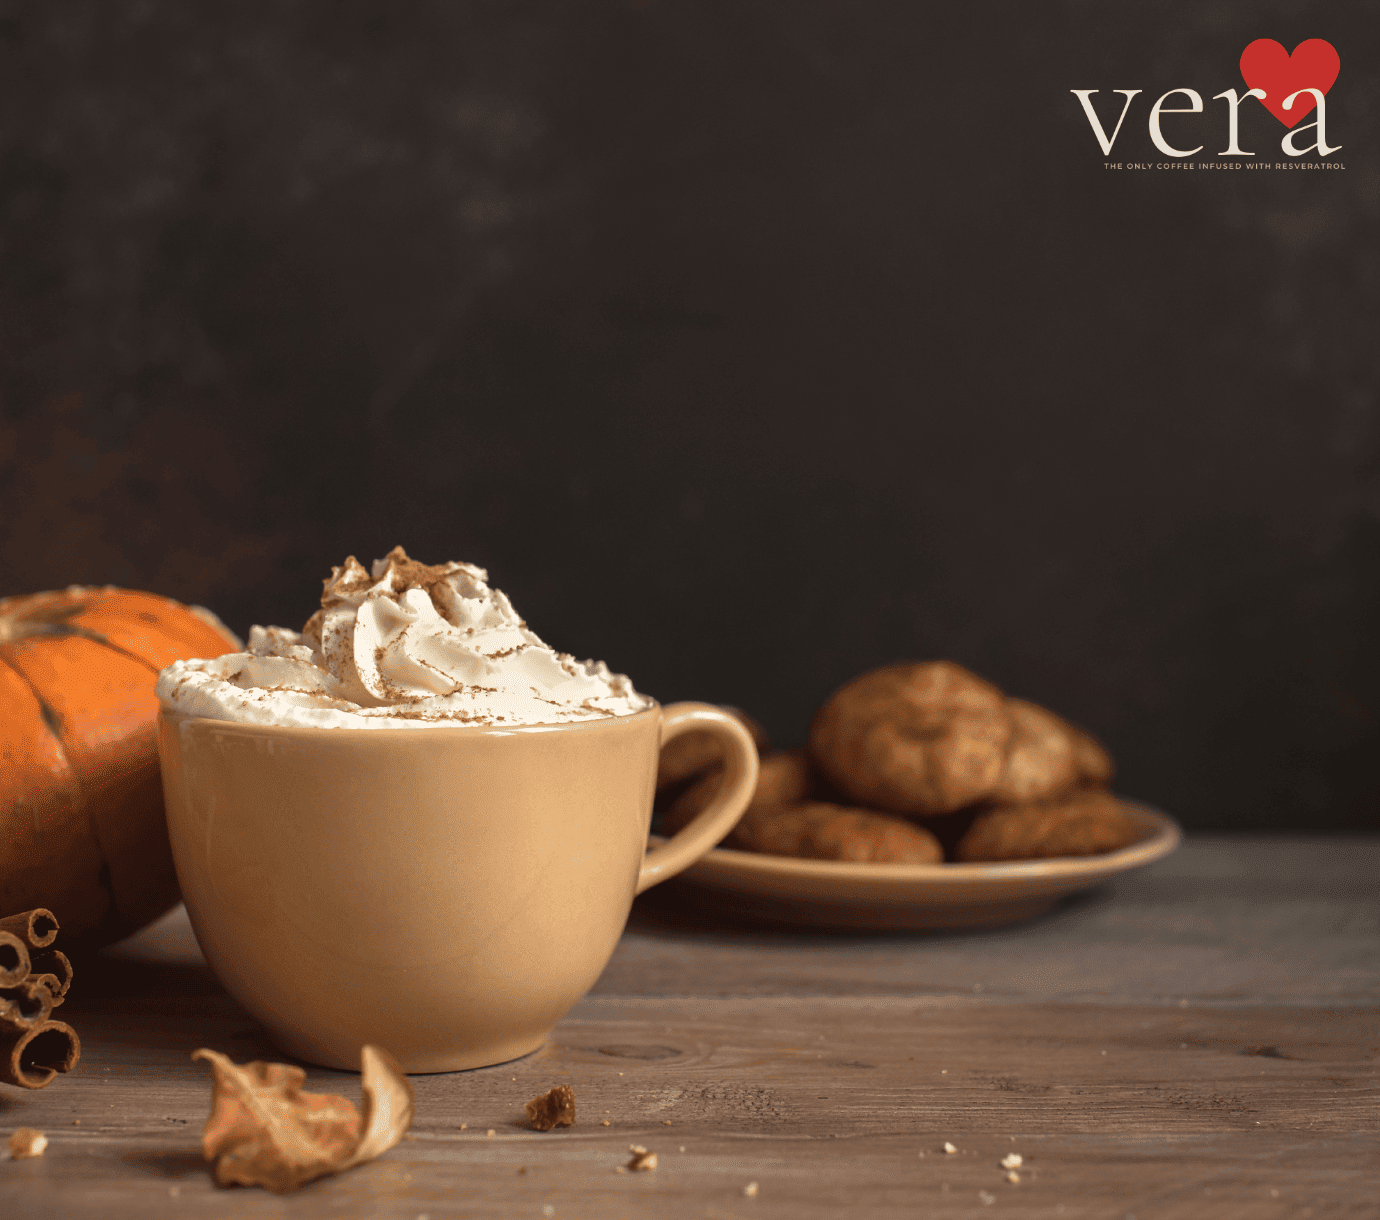 Vera roasting co, the only coffee infused with resveratrol, dover, New Hampshire, NH, coffee, health benefits, shop local, nh made, ice coffee, cold brew, calm blend, immunity blend, cardio blend